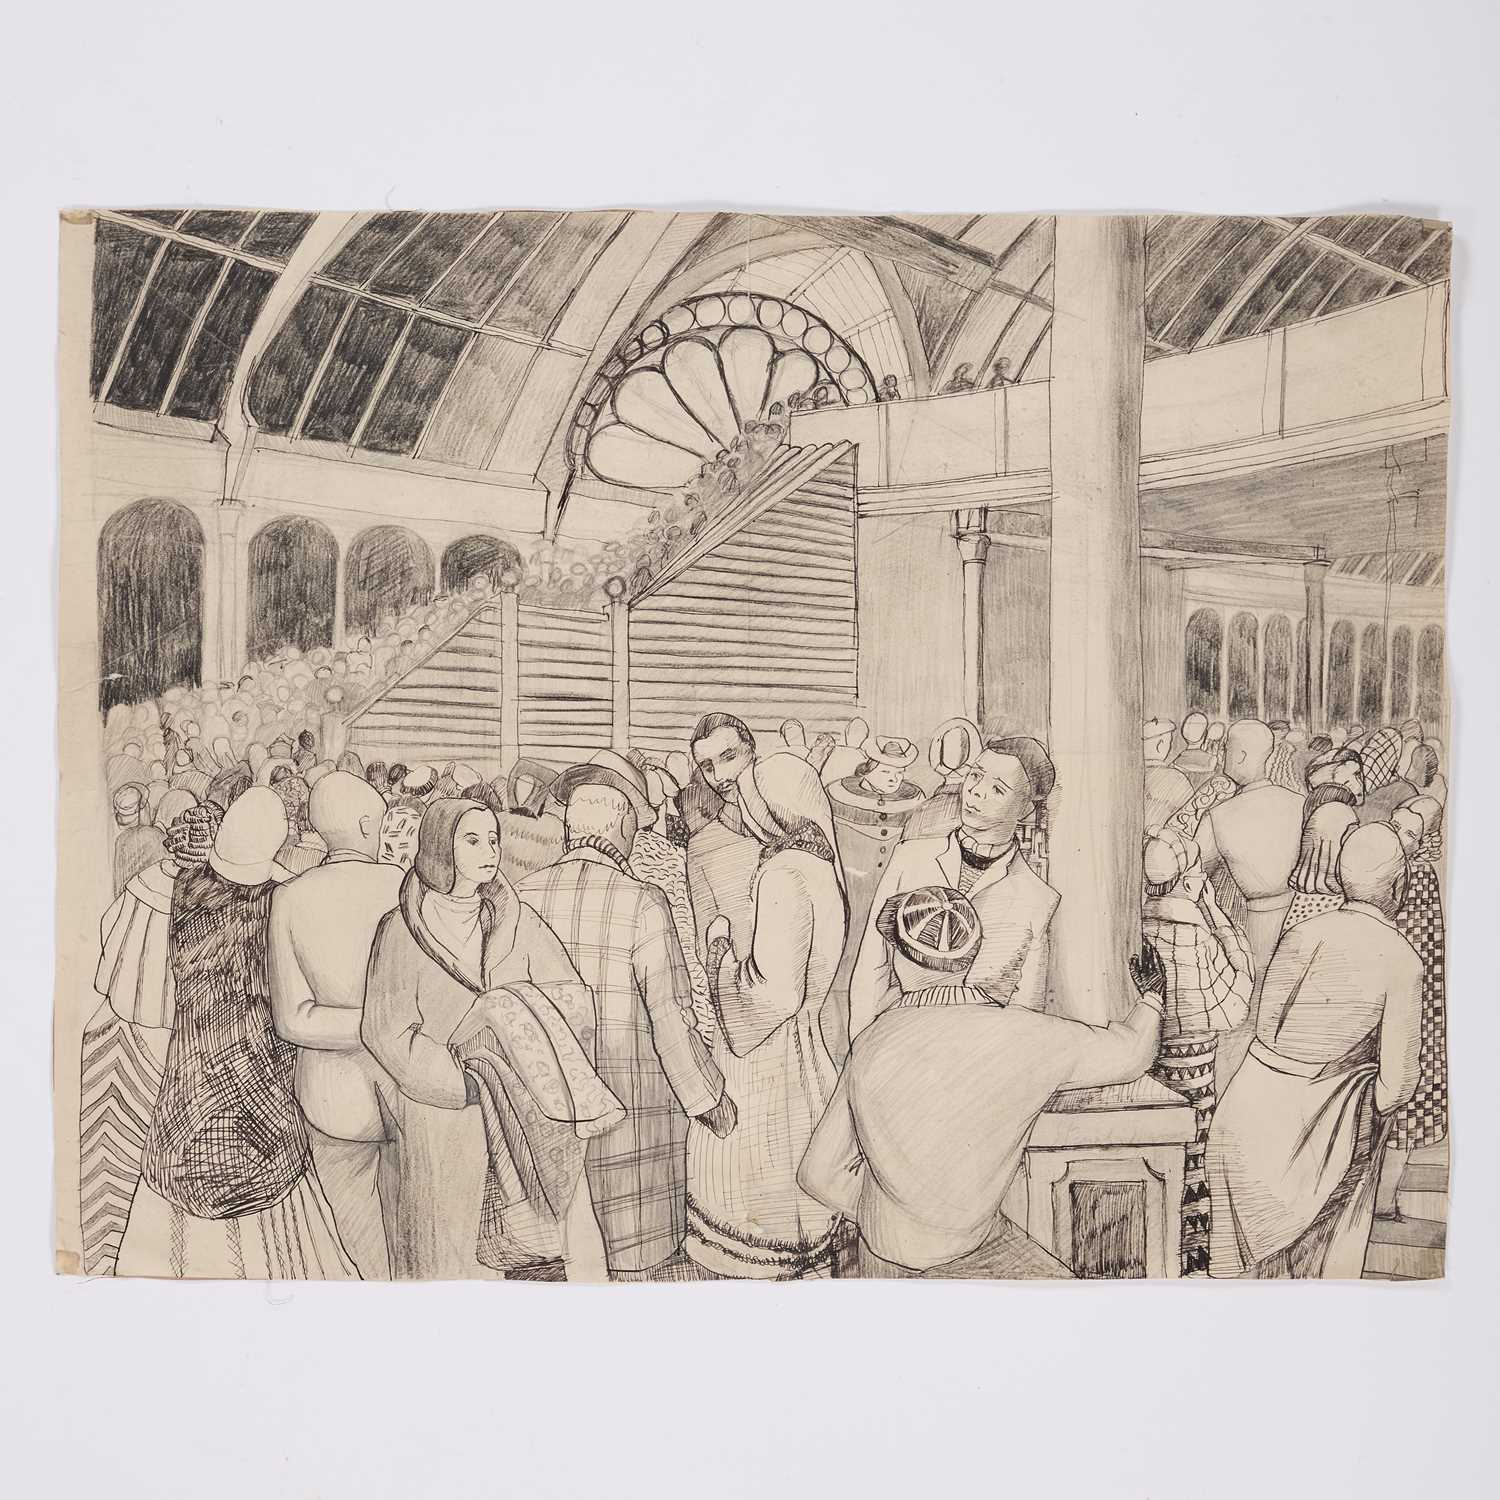 ATTRIBUTED TO STANLEY SPENCER (1891-1959) CROWDS AT A VENUE - Image 2 of 3